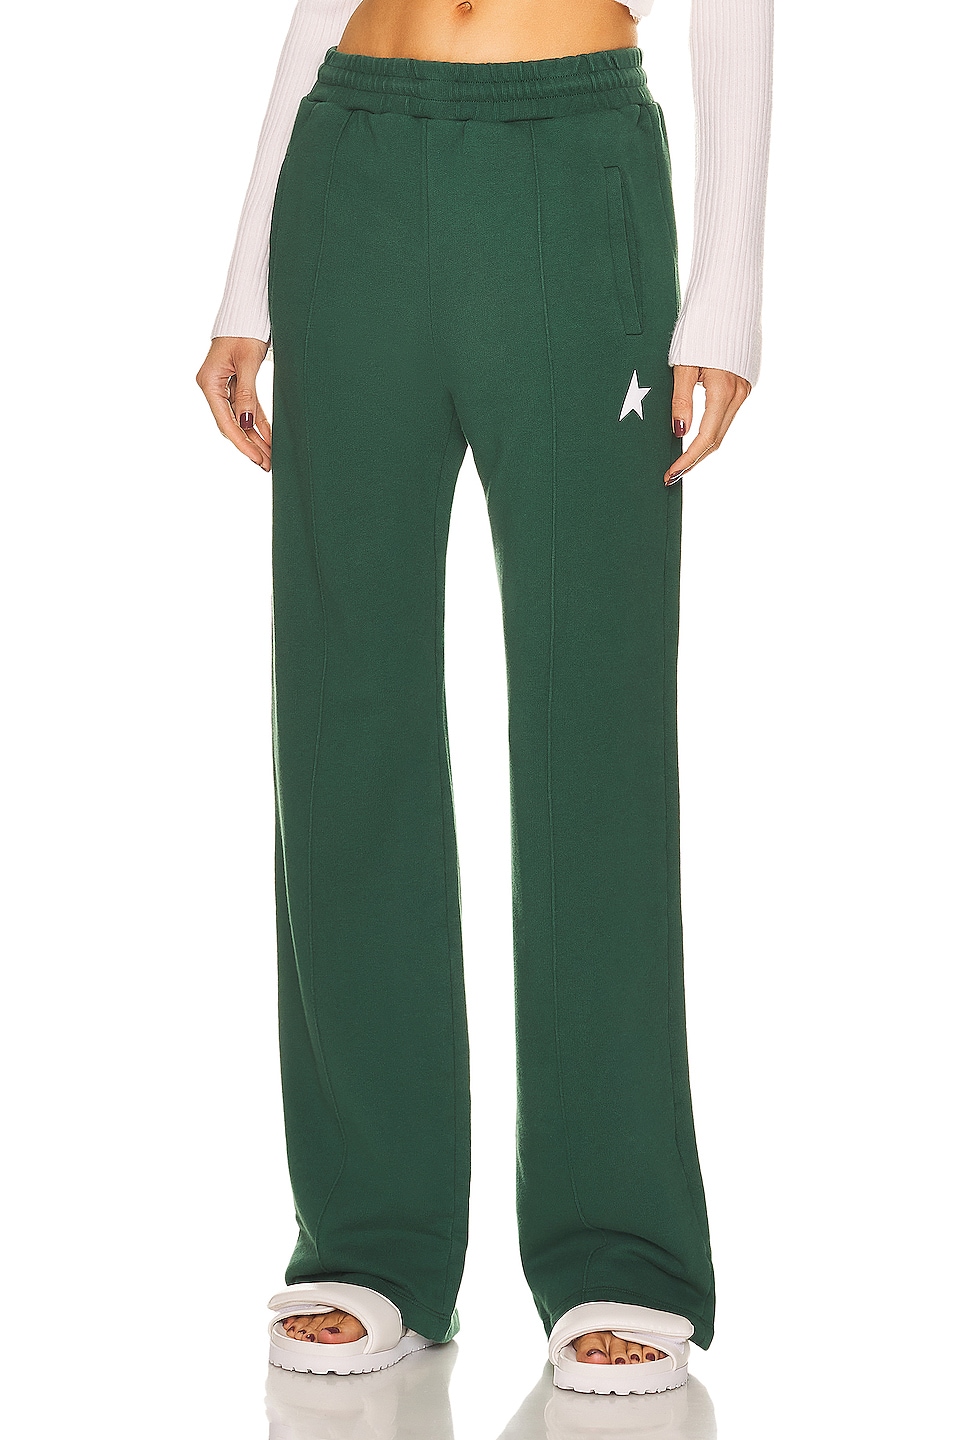 Image 1 of Golden Goose Star Jogging Pants in Bright Green & White